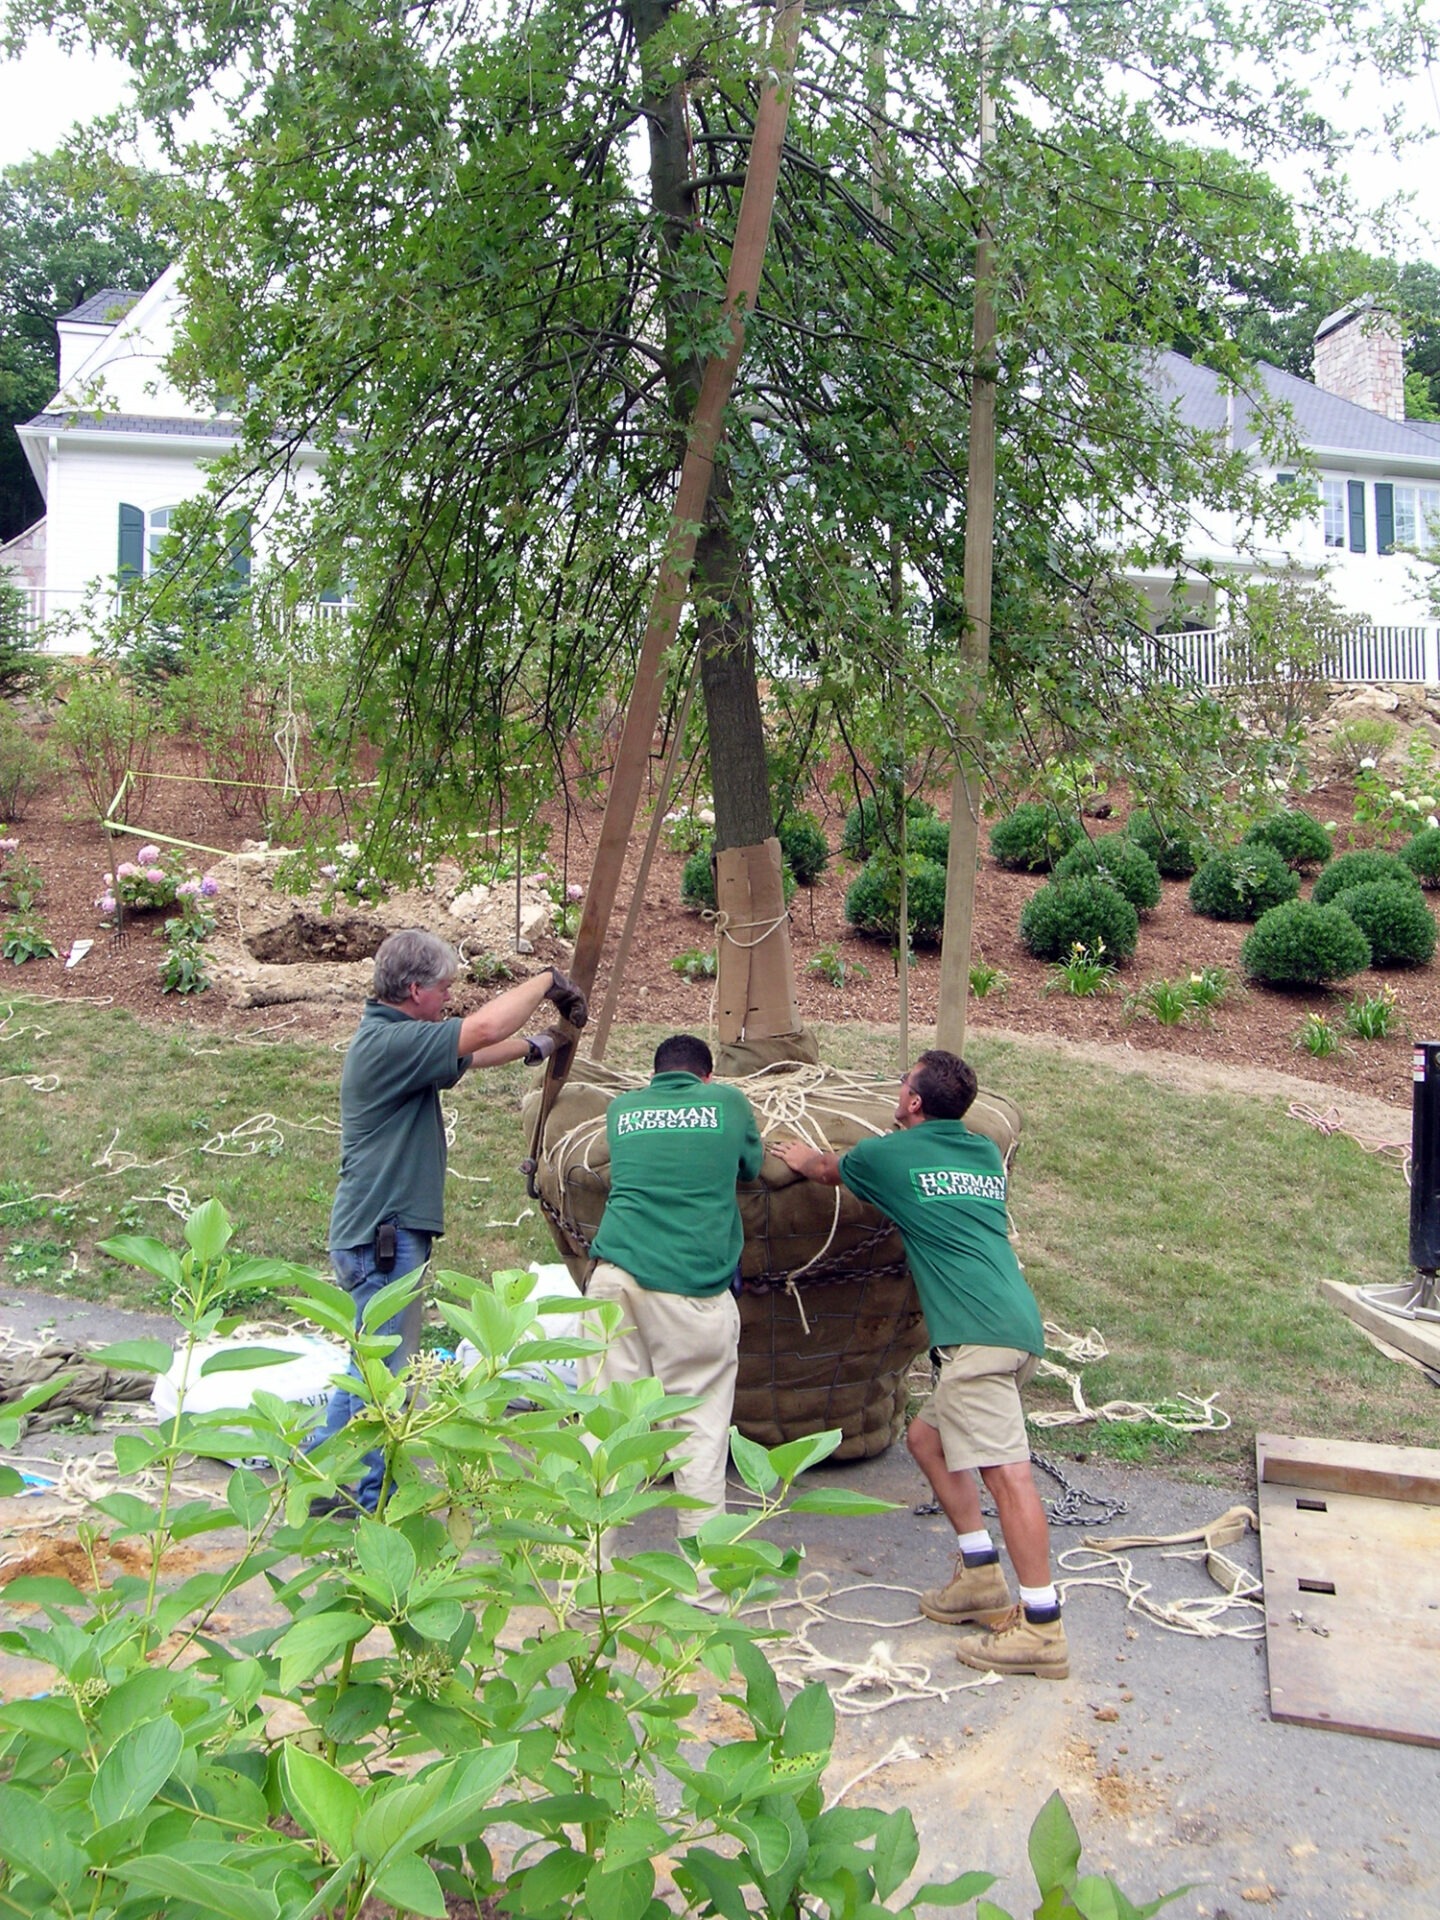 Three people are transplanting a large tree with a burlapped root ball, supported by wooden stakes, in a residential landscape setting.